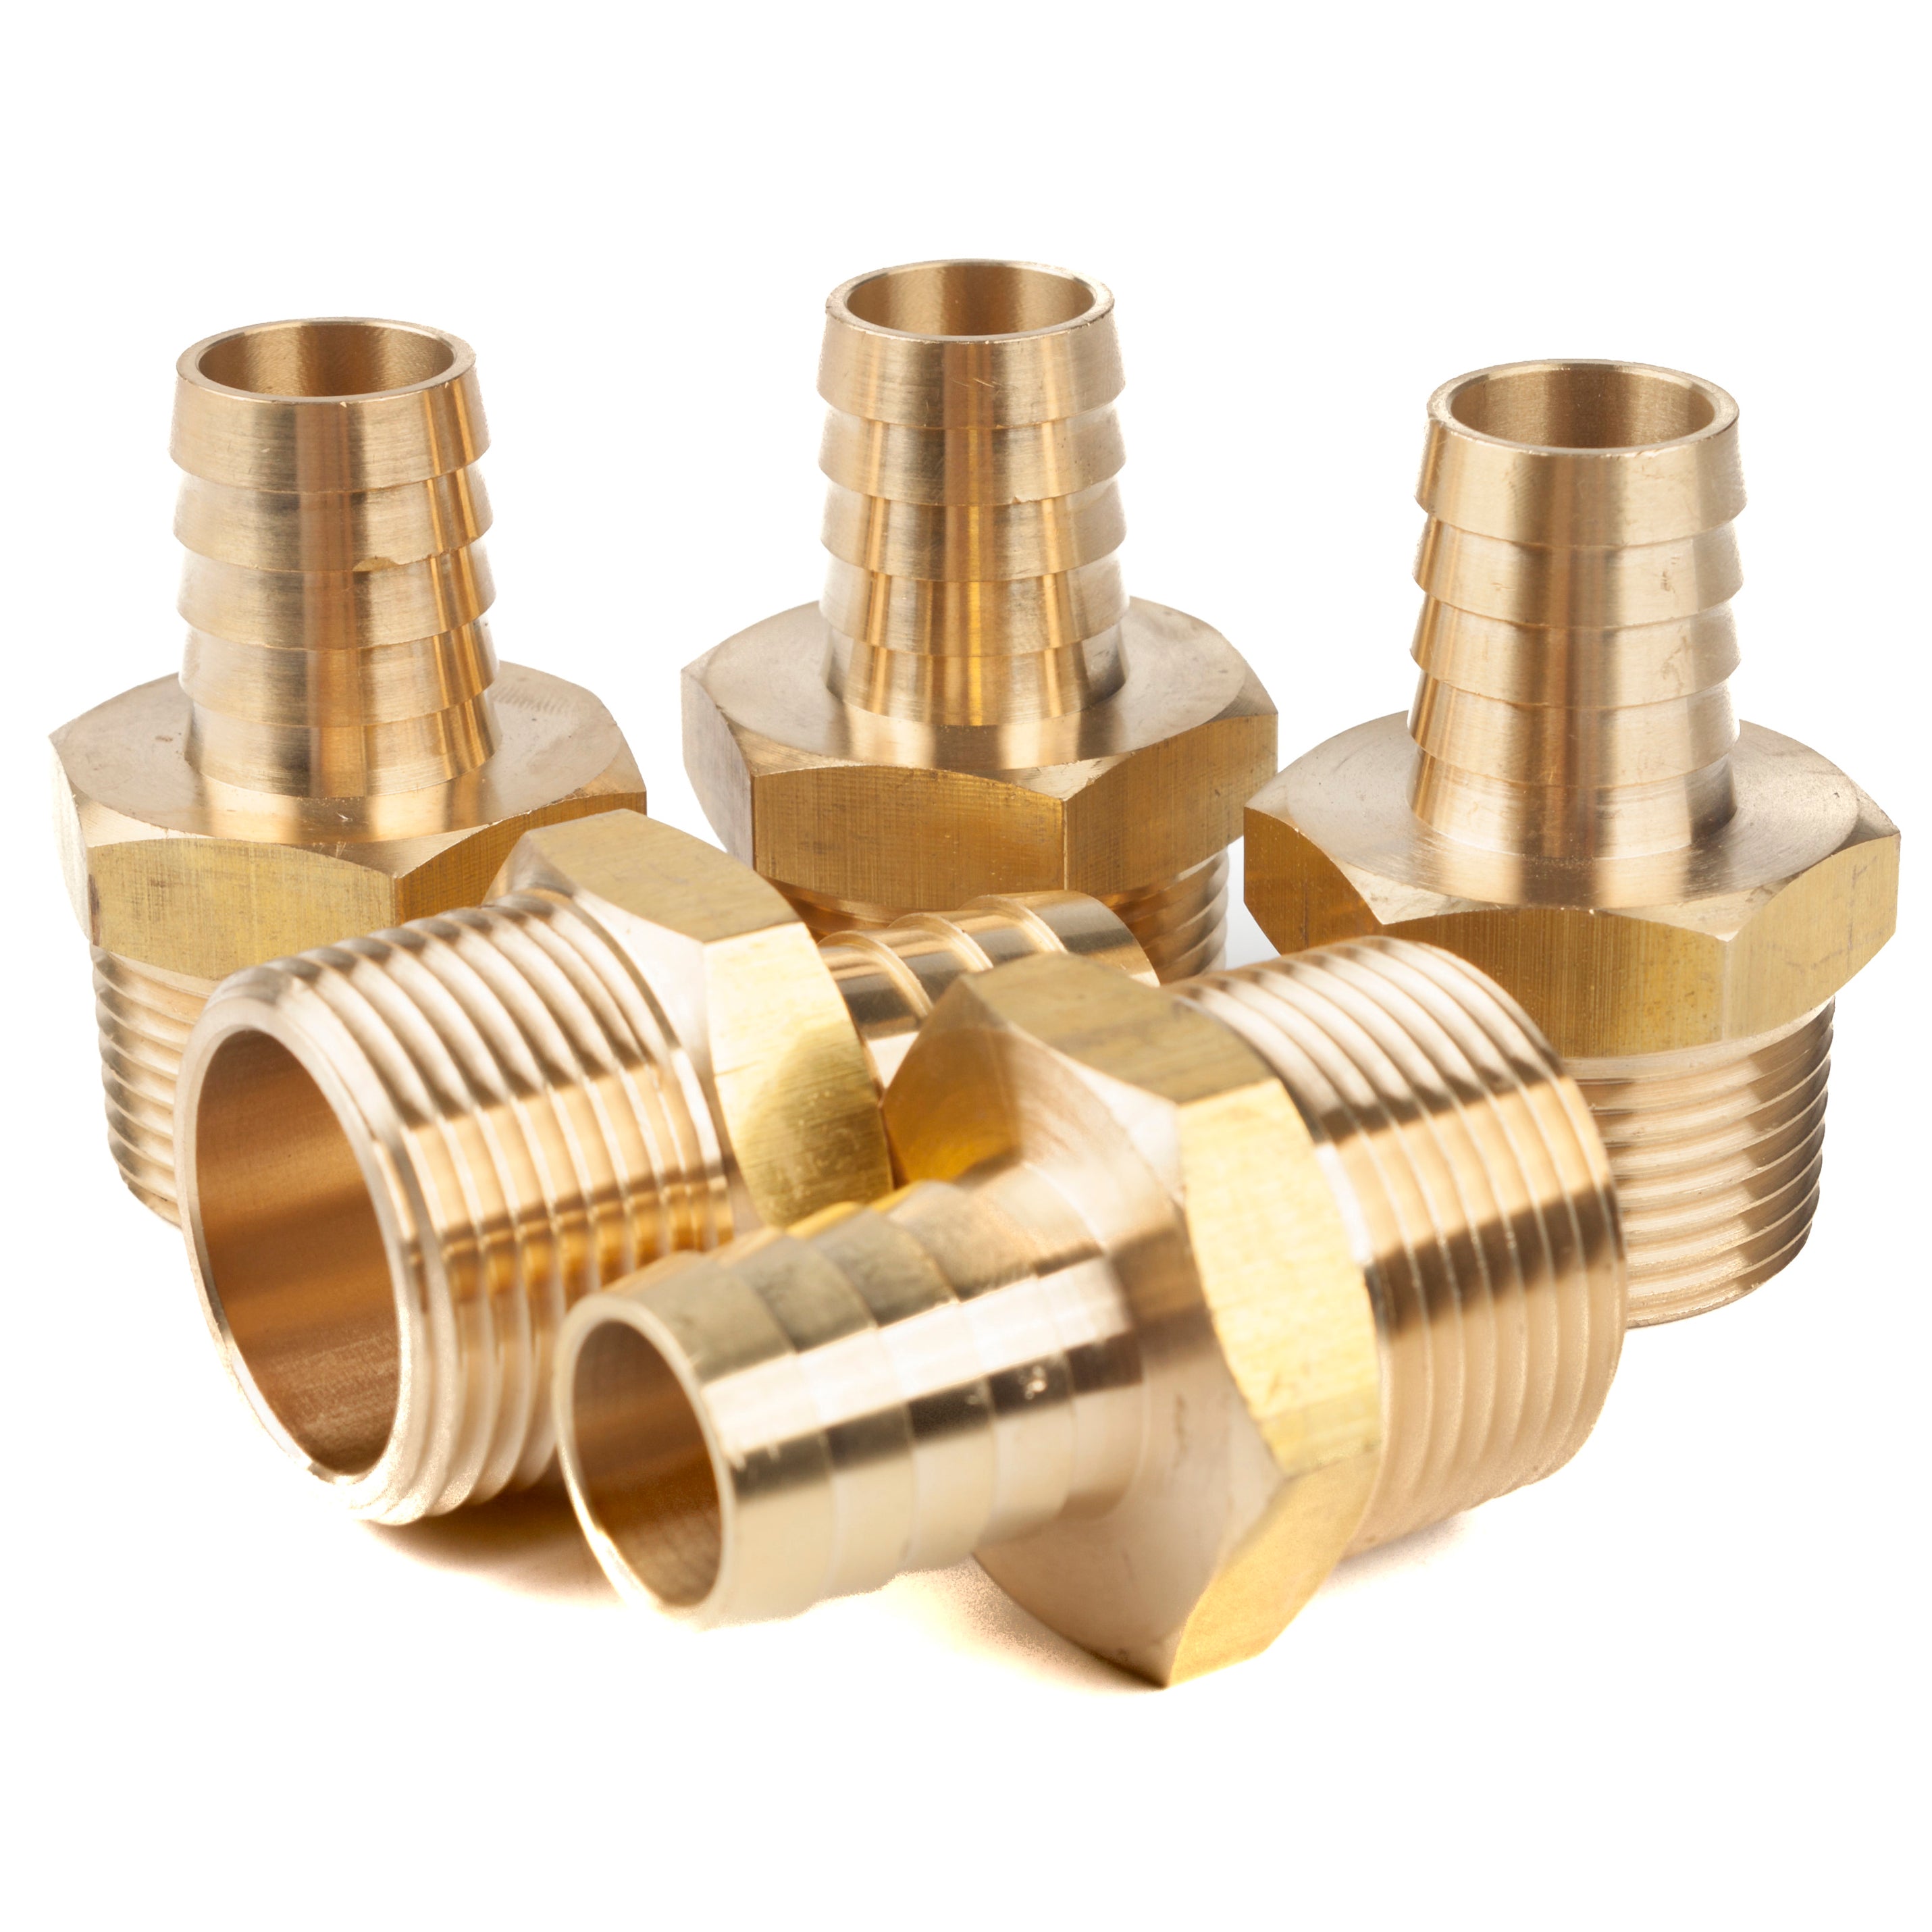 LTWFITTING Brass Fitting Connector 3/4-Inch Hose Barb x 1-Inch NPT Male Fuel Gas Water(Pack of 5)